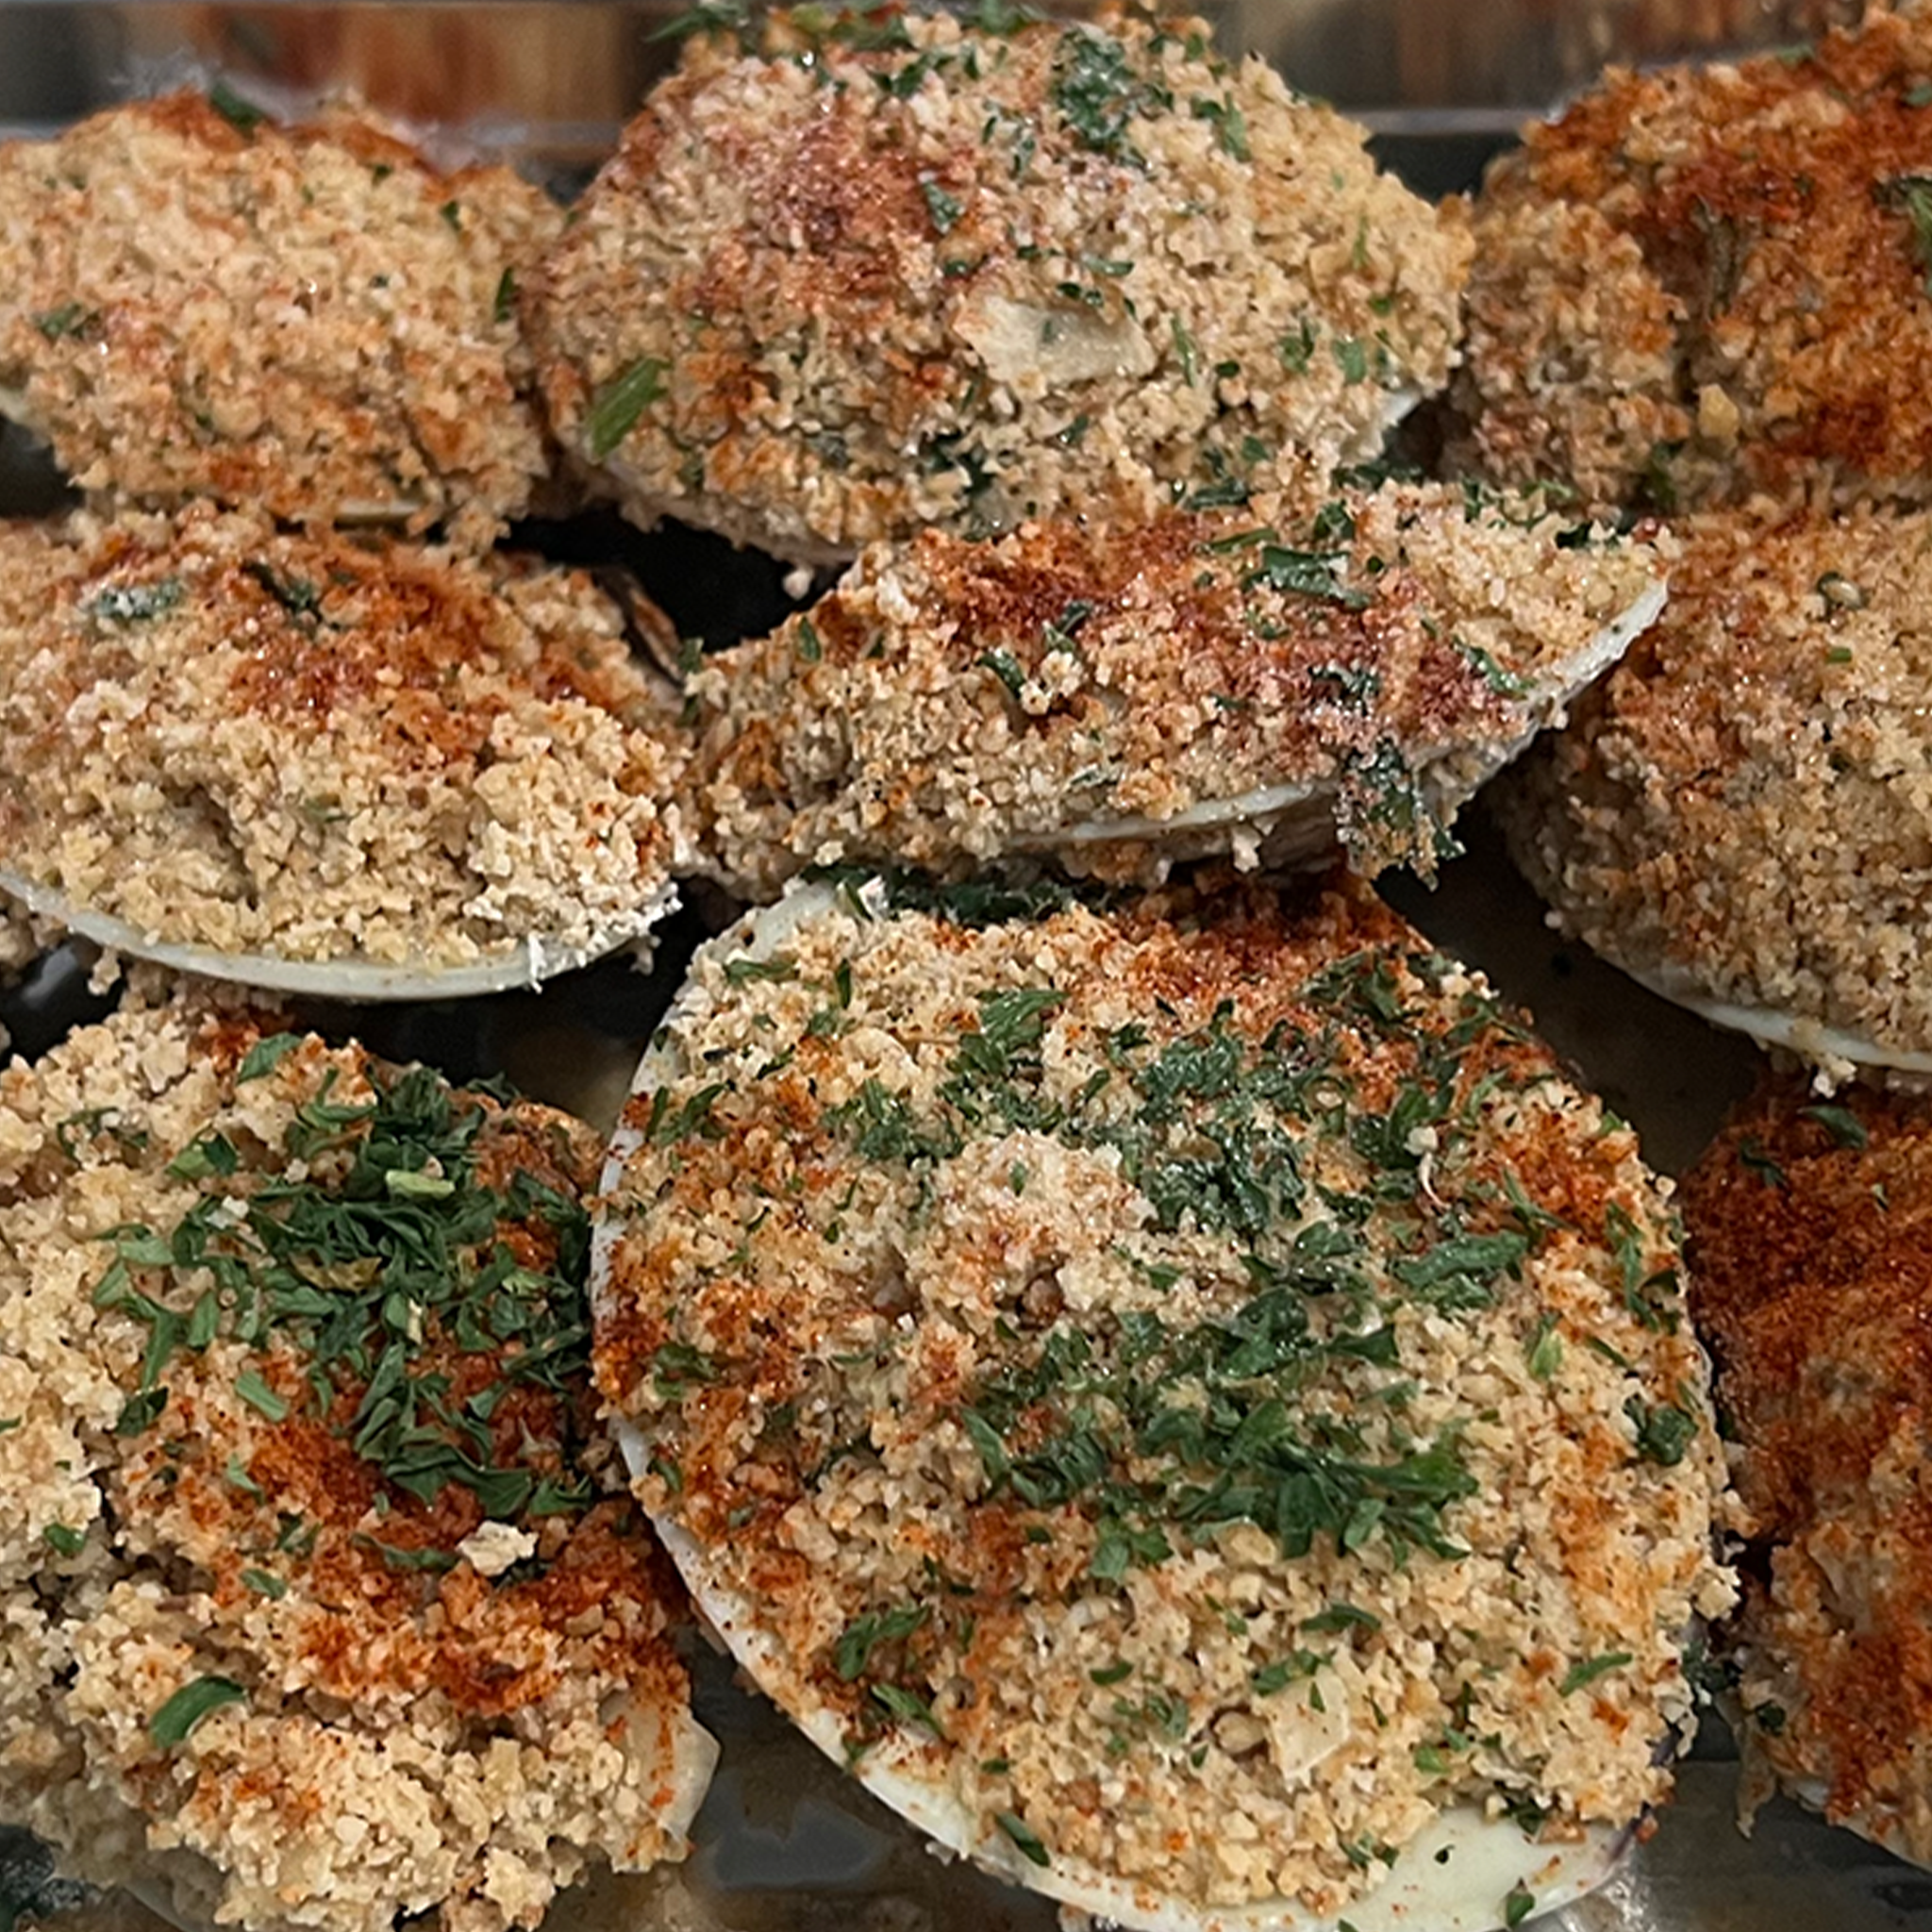 Baked Clams from Our Freezer - One Dozen – Blue Water Fish